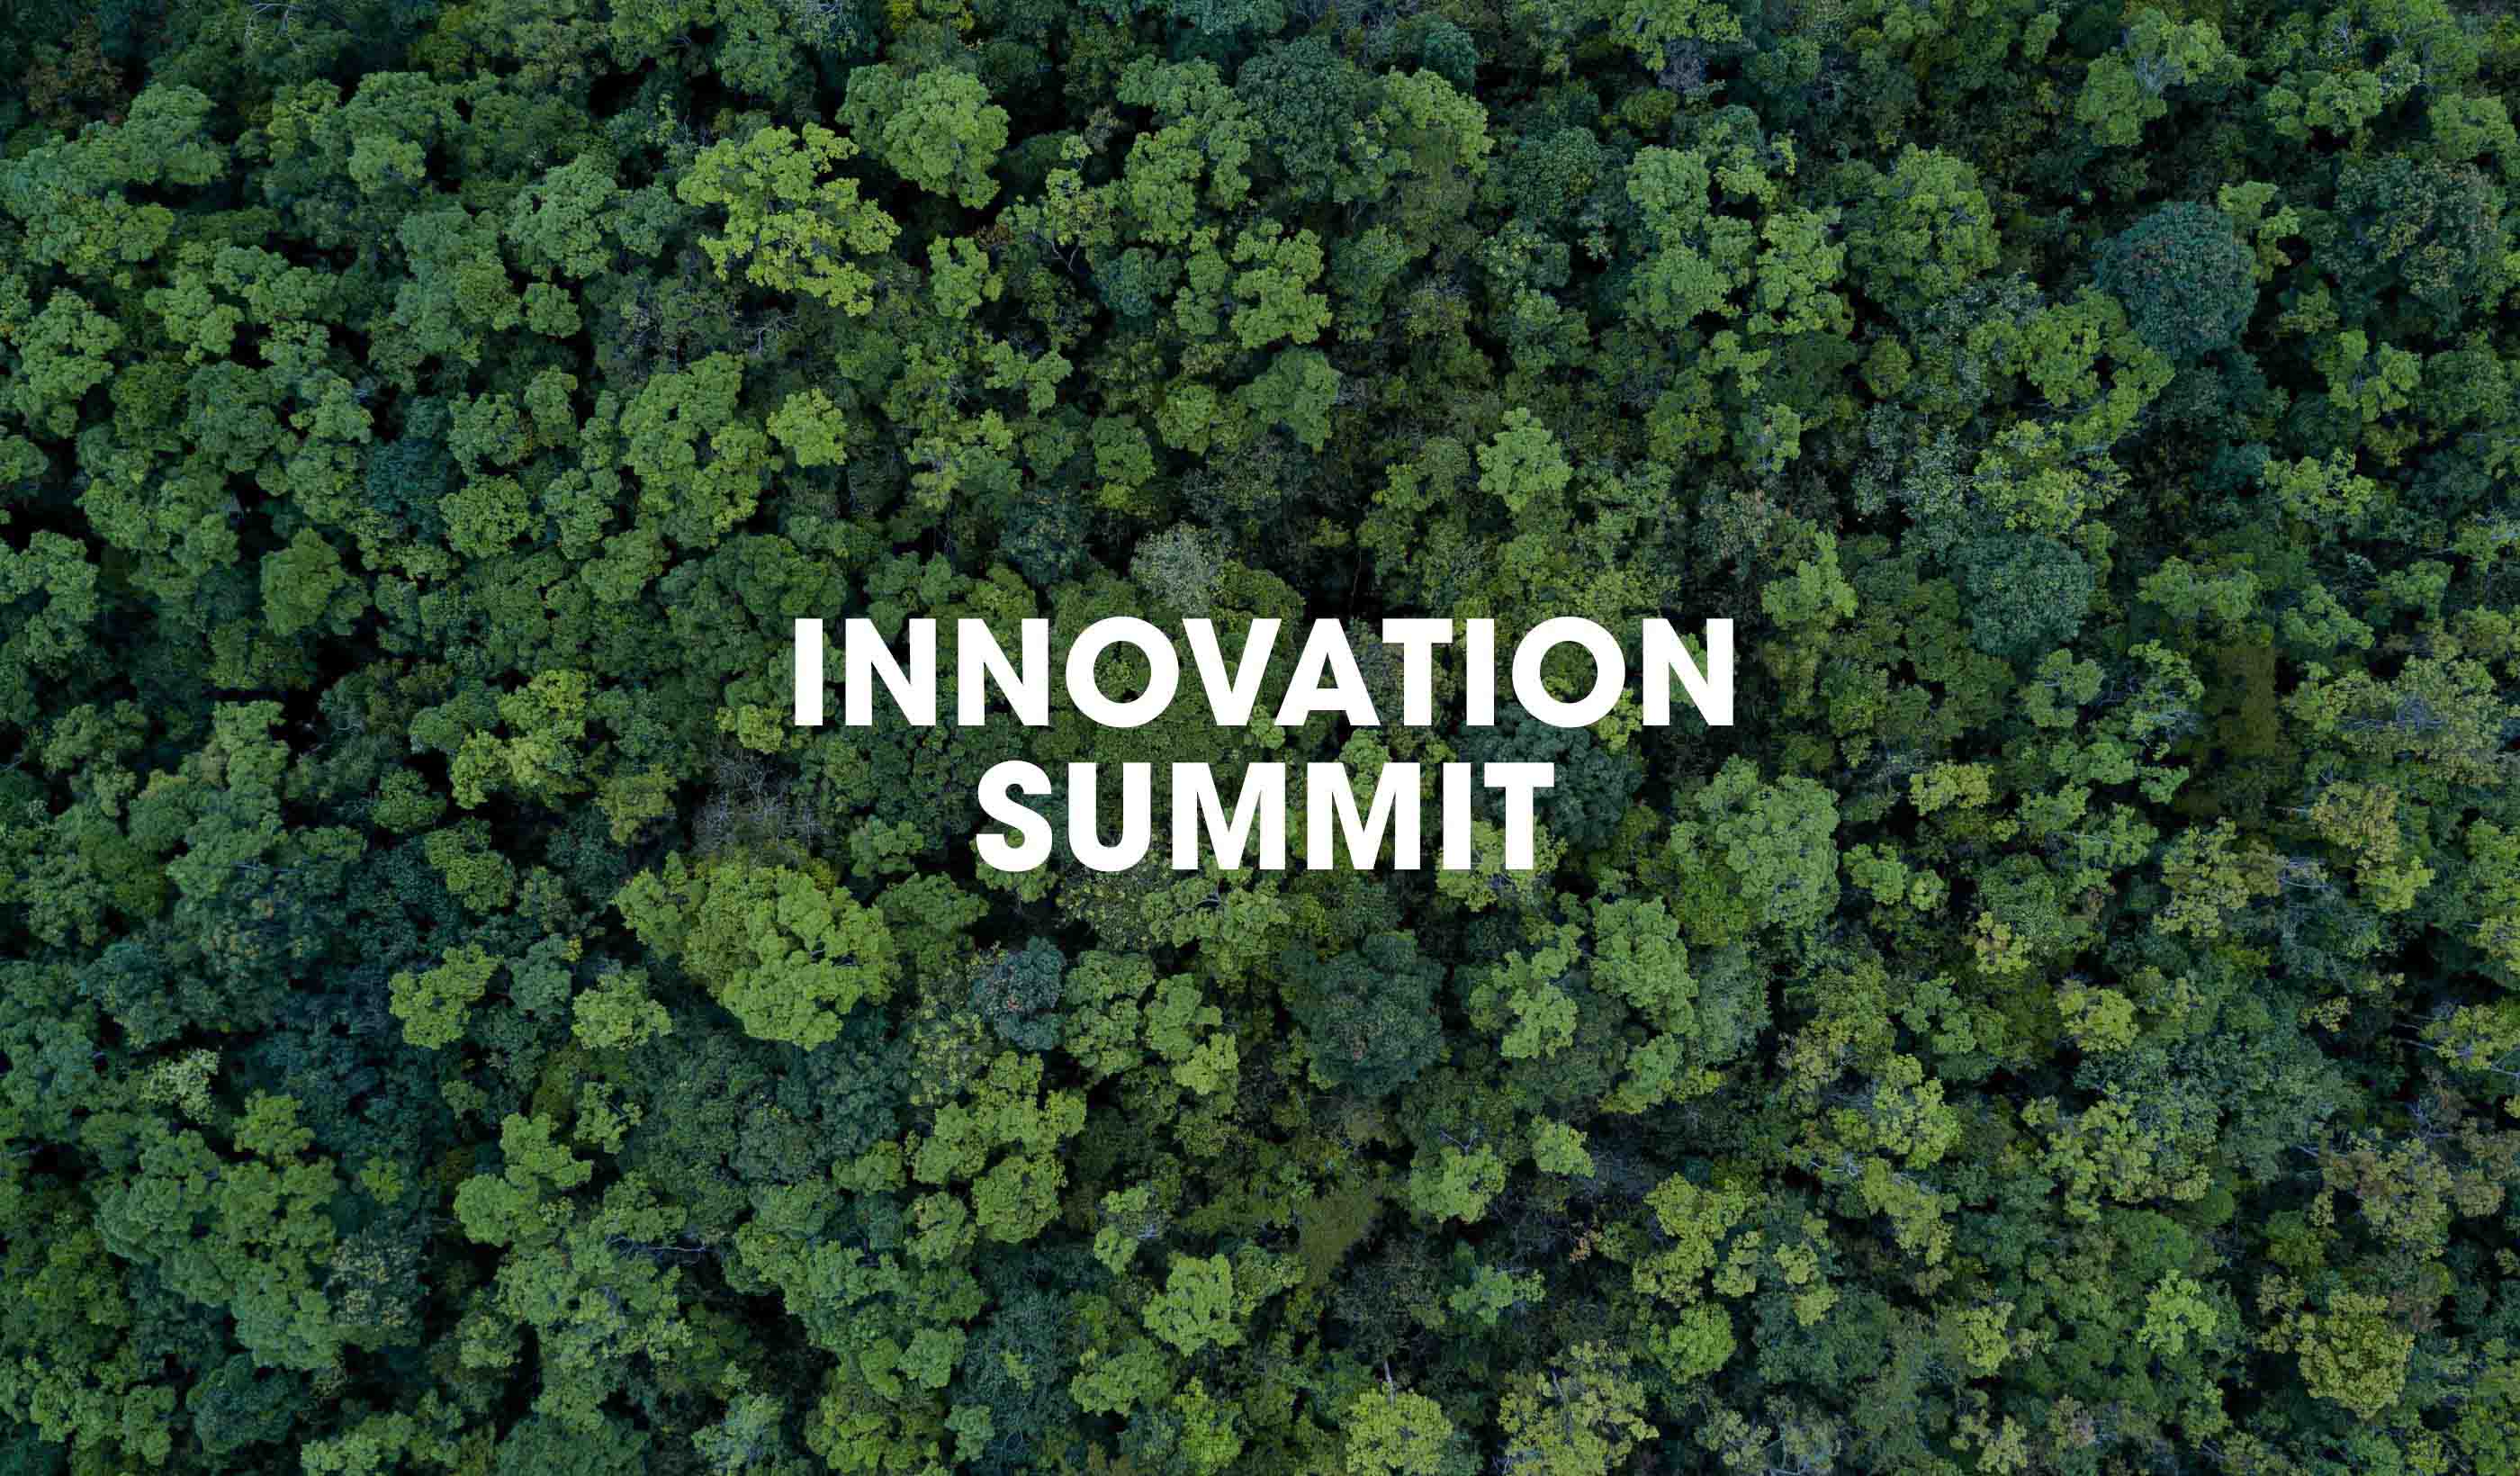 Innovation Summit: Climate Change Overview